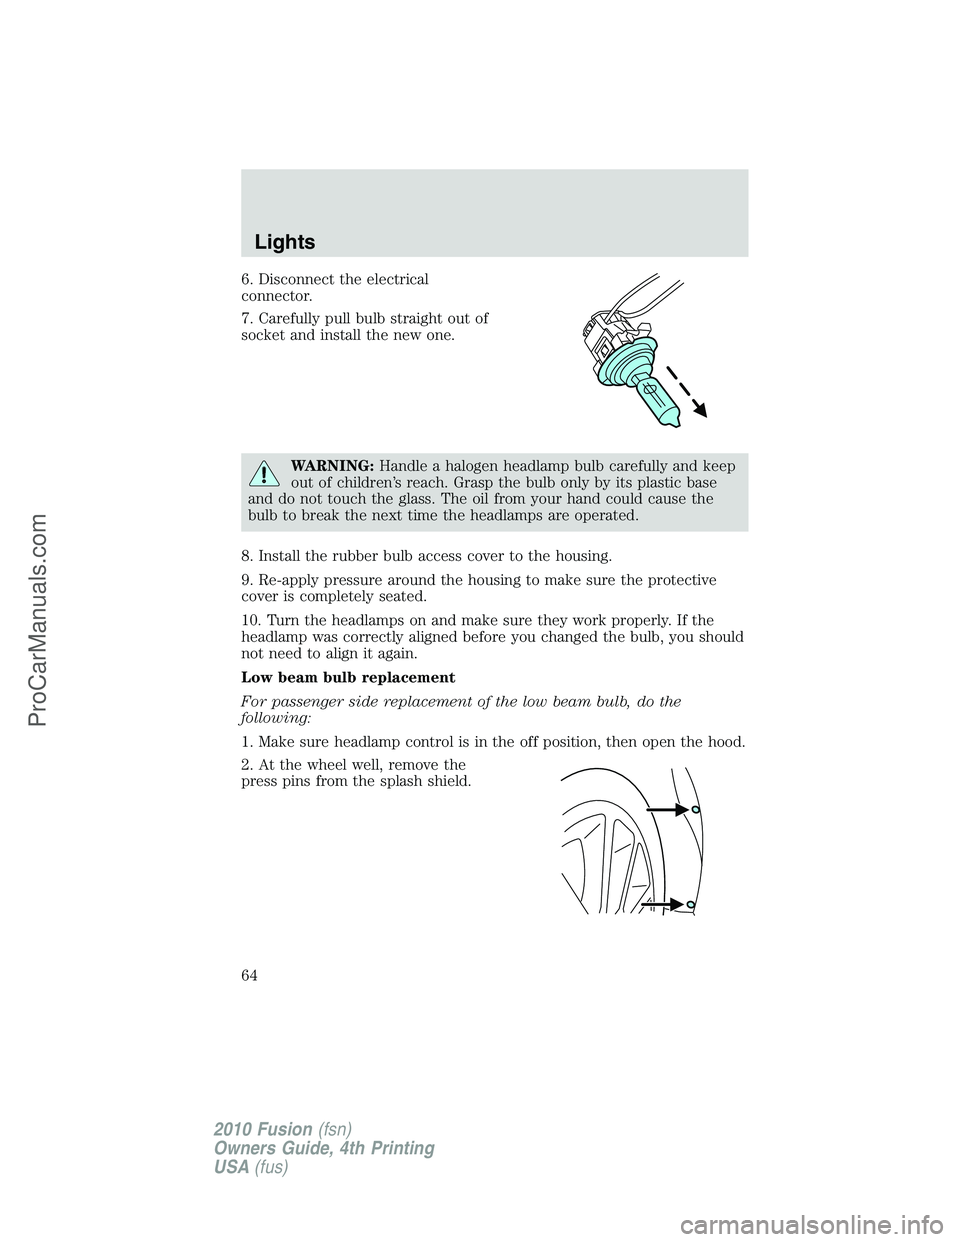 FORD FUSION 2010 Repair Manual 6. Disconnect the electrical
connector.
7. Carefully pull bulb straight out of
socket and install the new one.
WARNING:Handle a halogen headlamp bulb carefully and keep
out of children’s reach. Gras